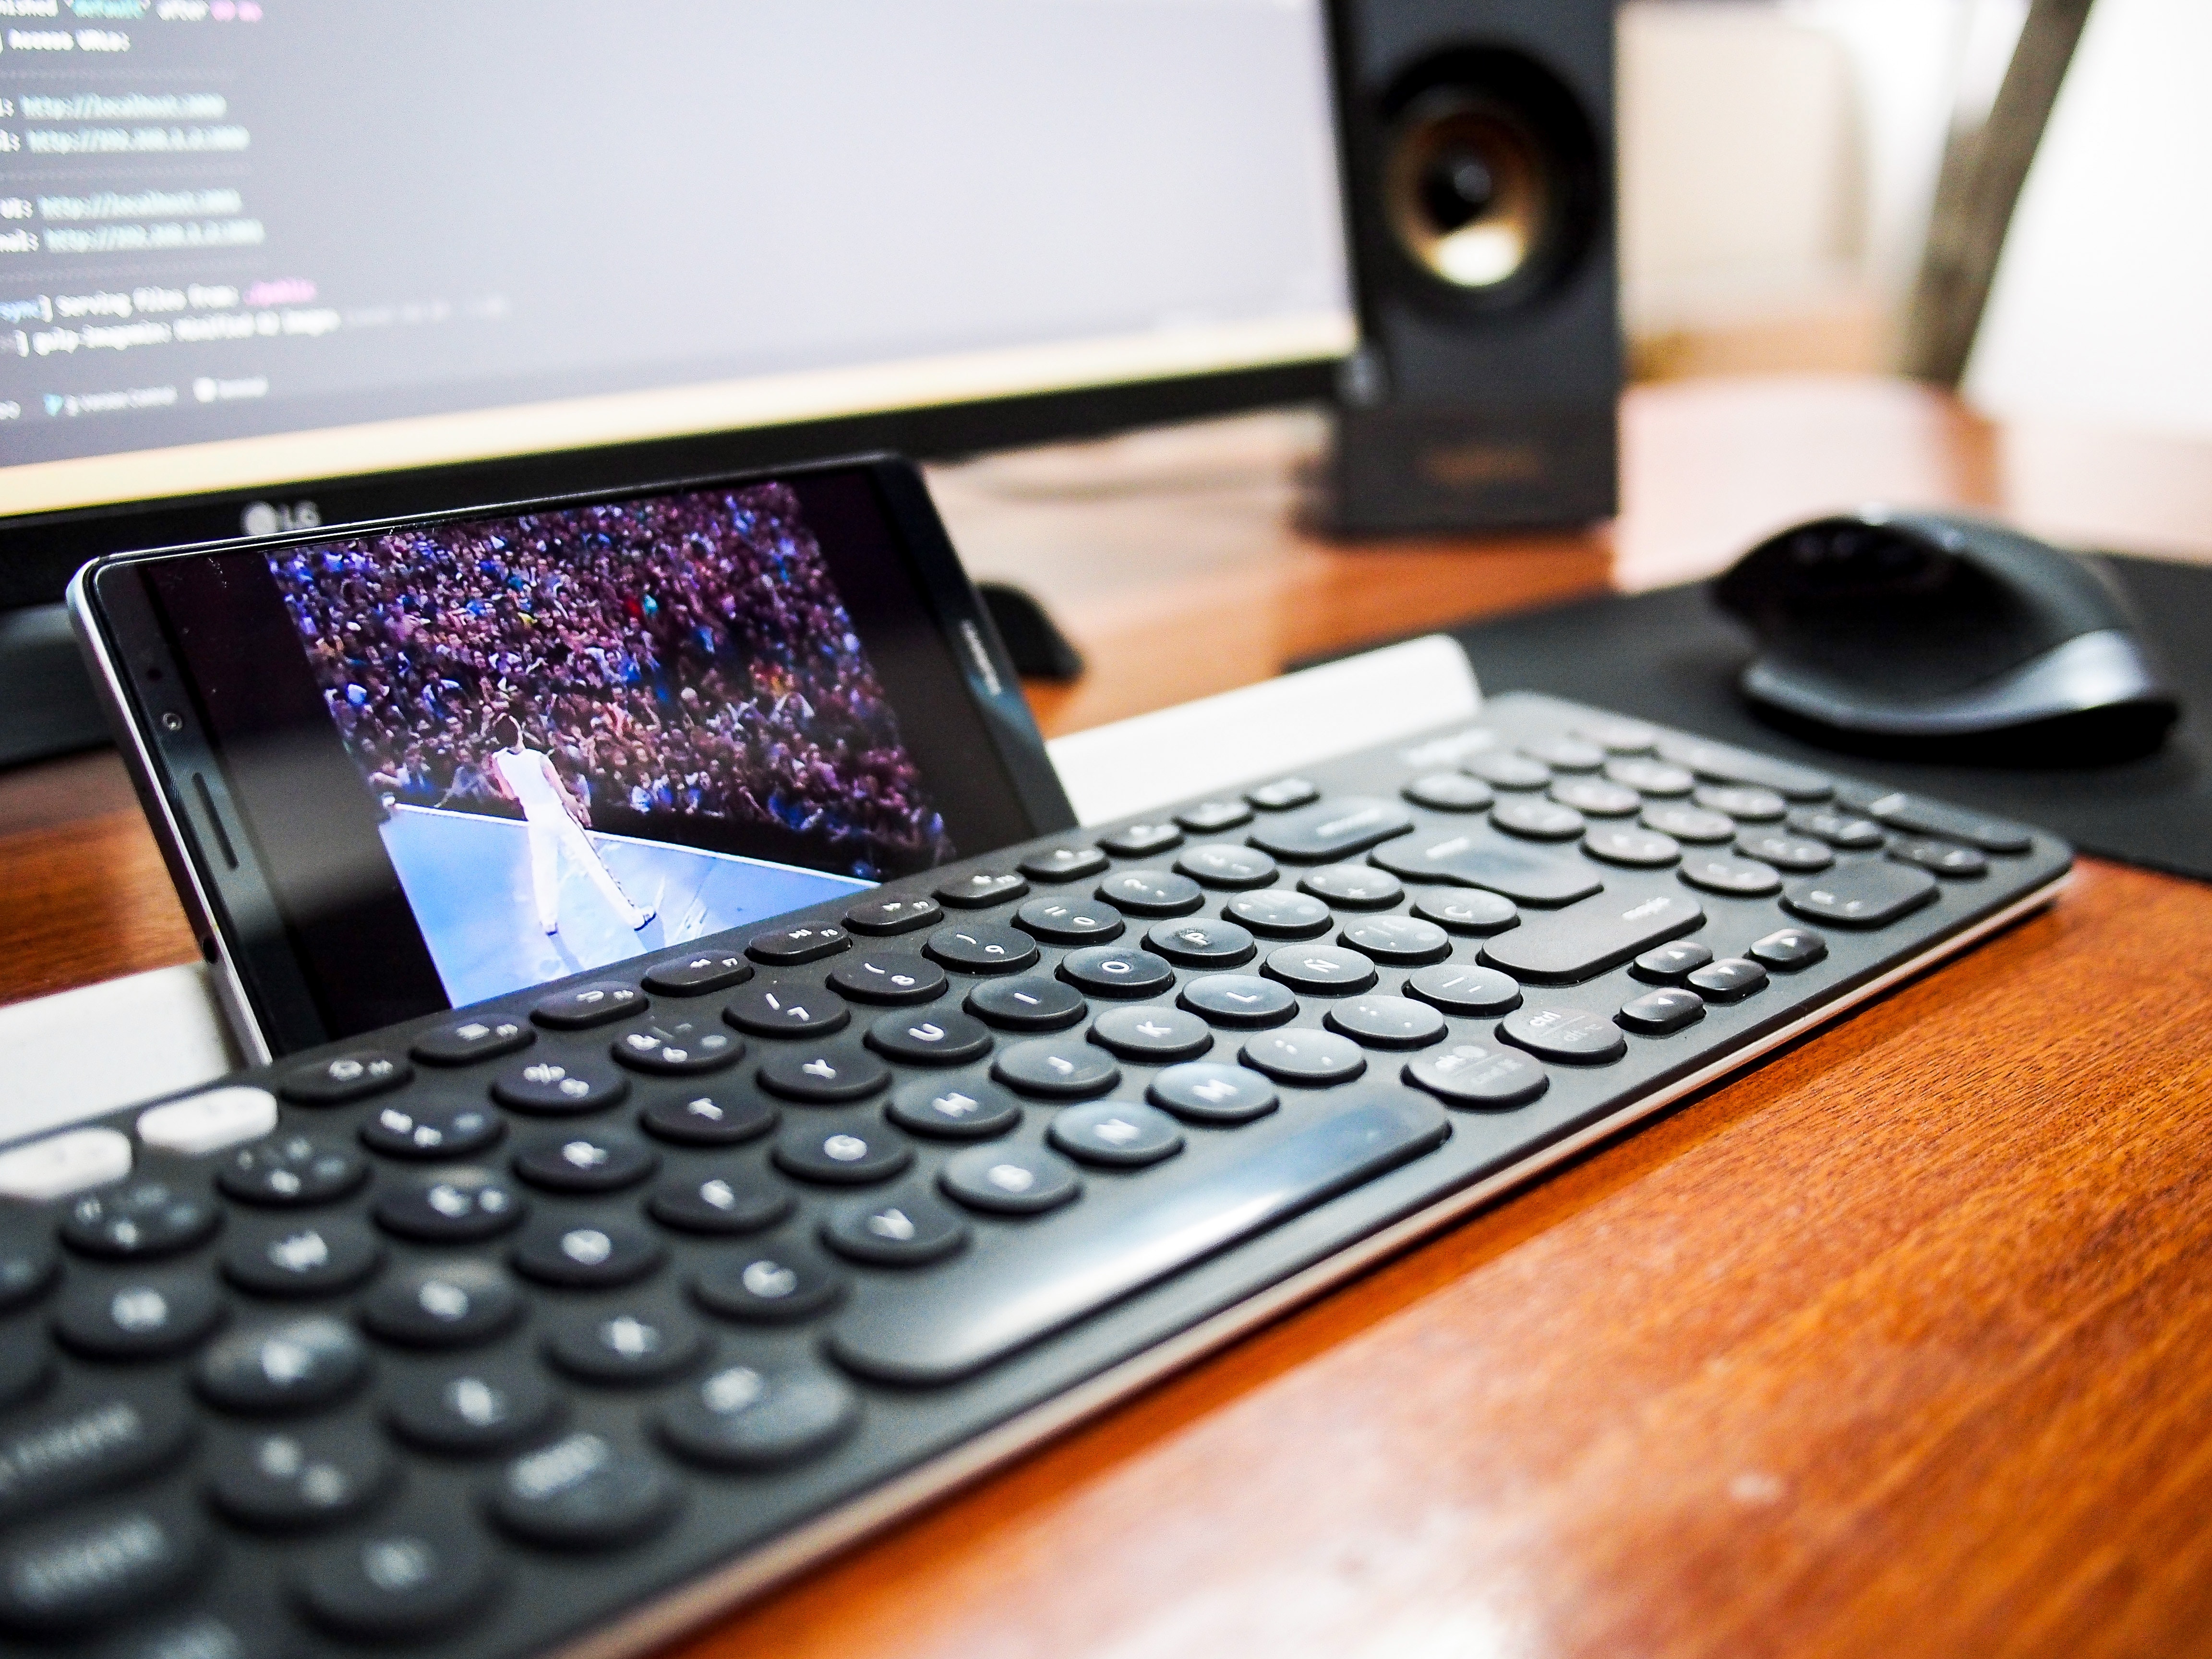 A cell phone propped between a computer keyboard and monitor, playing a video.